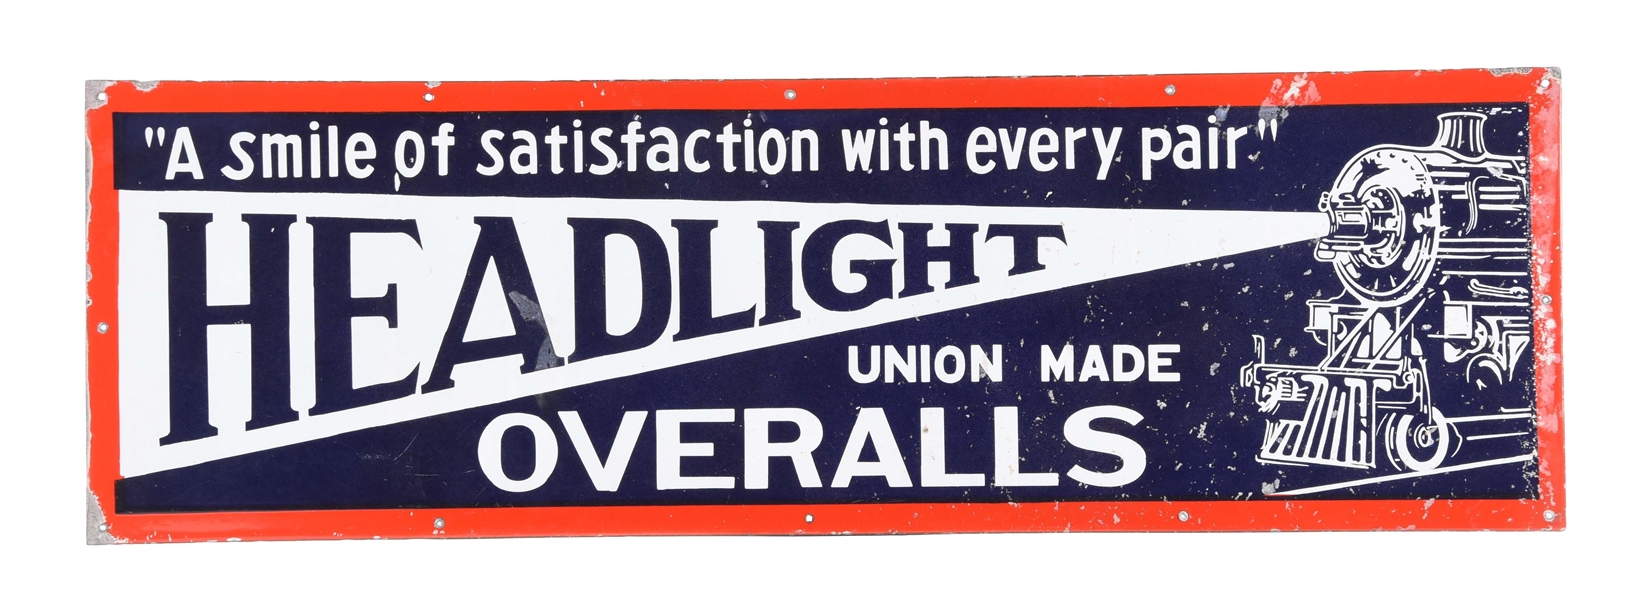 HEADLIGHT OVERALLS PORCELAIN SIGN WITH LOCOMOTIVE GRAPHIC.